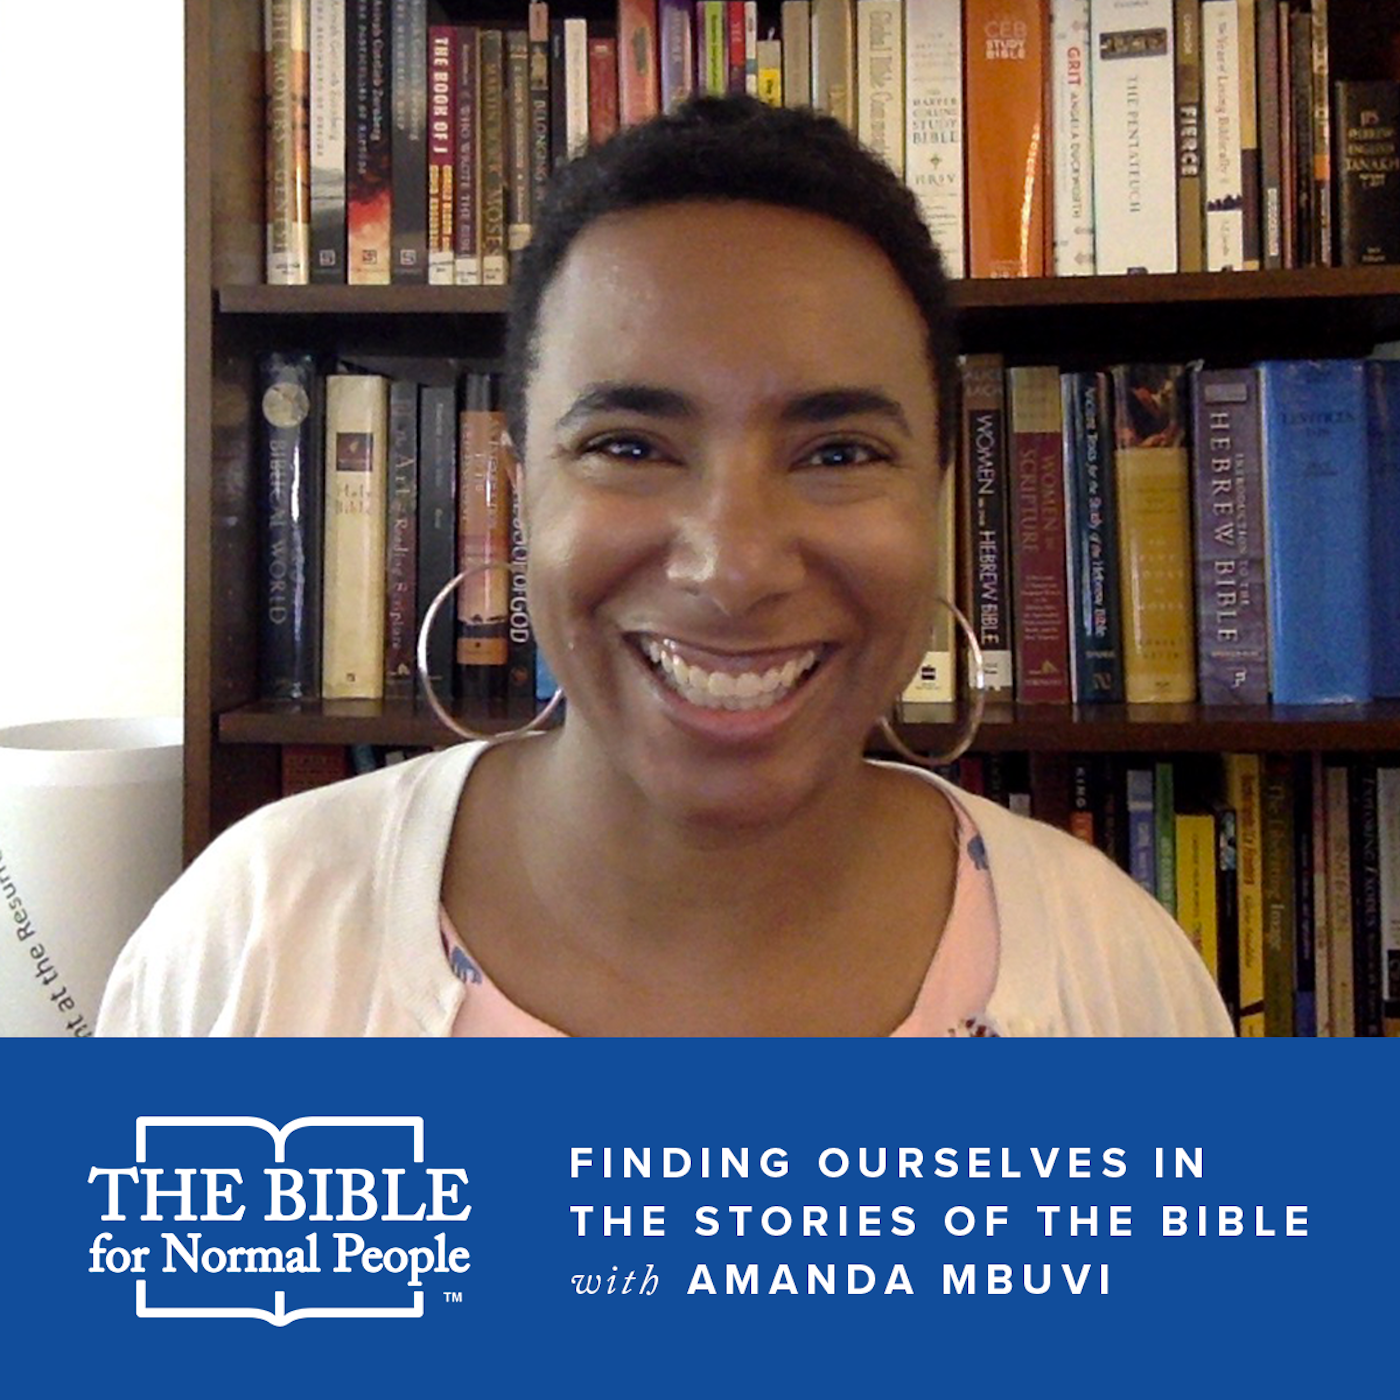 Interview with Amanda Mbuvi: Finding Ourselves in the Stories of the Bible